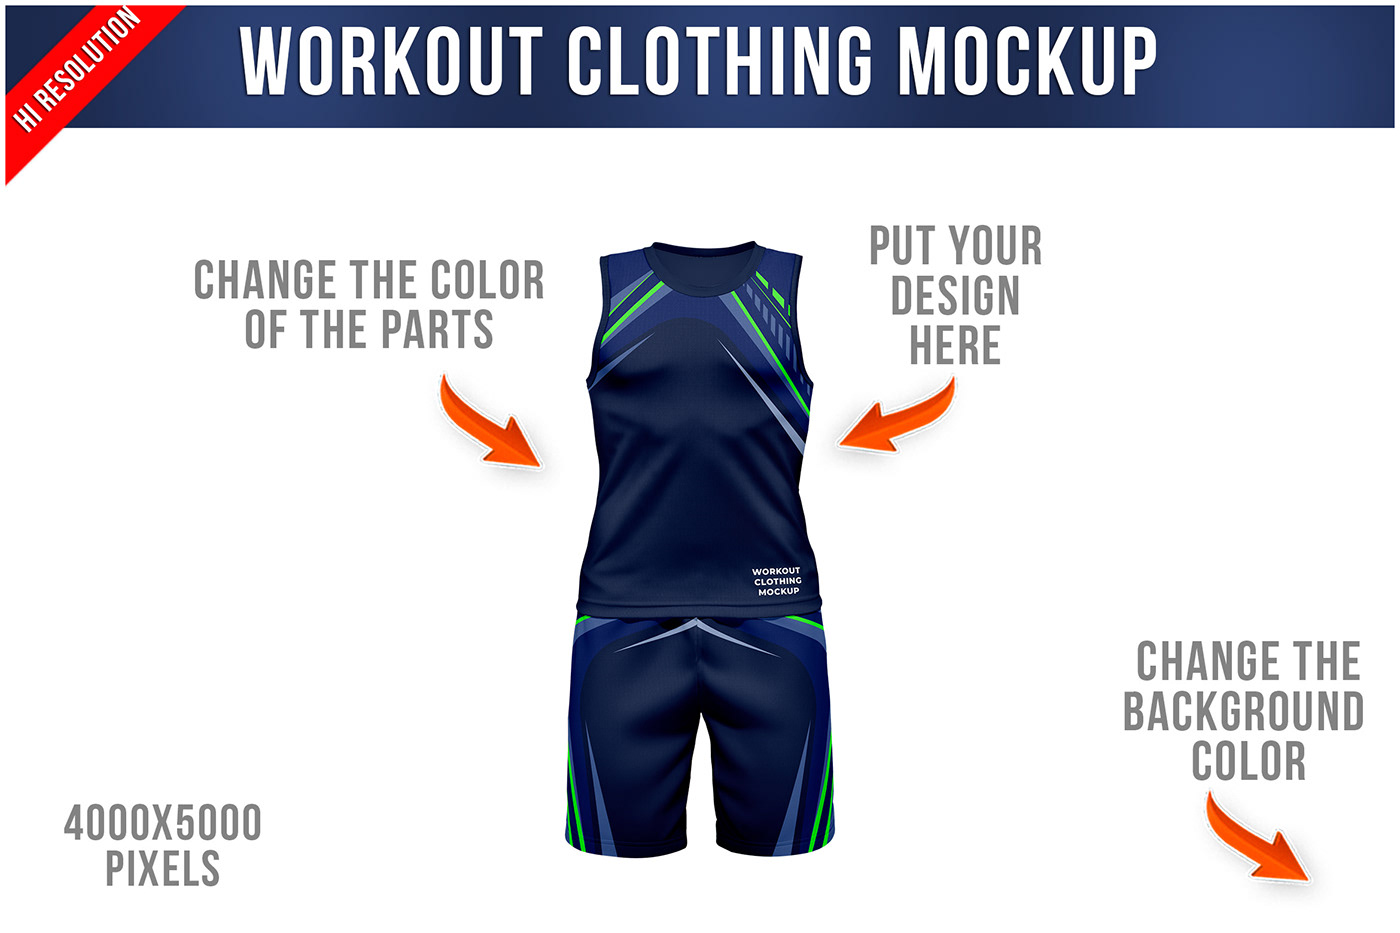 men's workout Clothing Mockup Active wear fitness apparel sports athletic